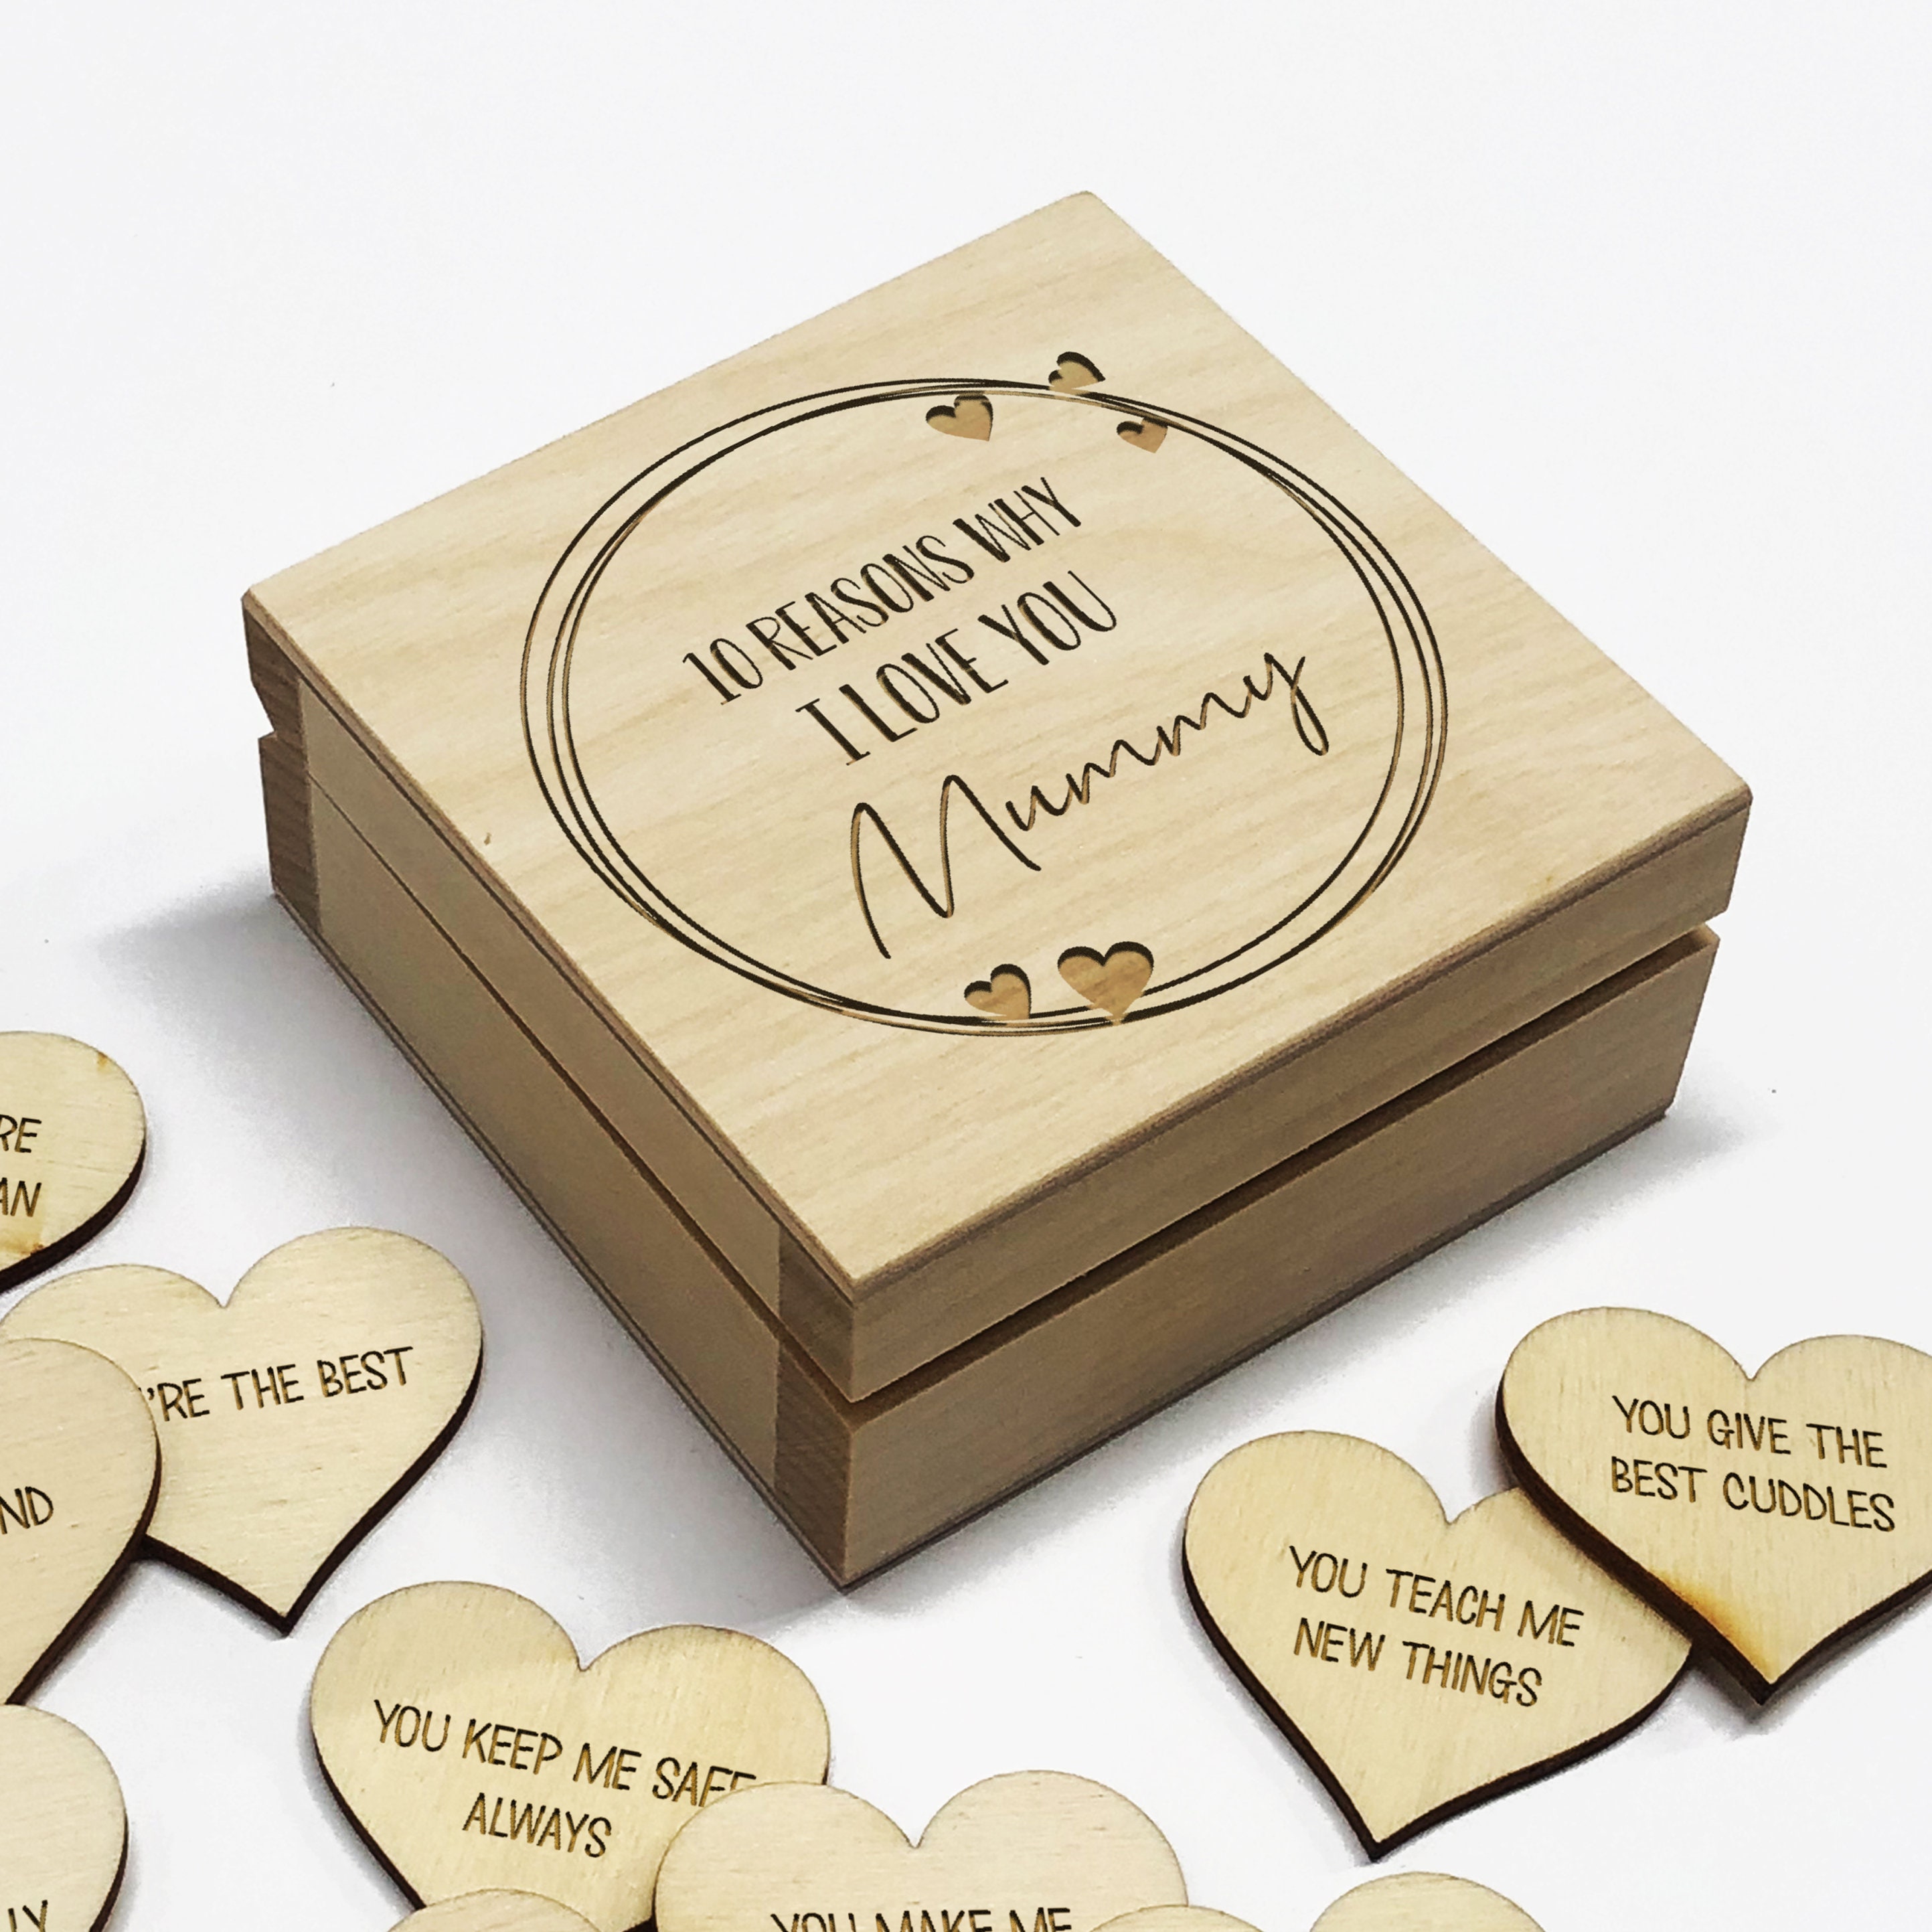 Unique Friendship Gift,Wooden Hearts in The Box with Reasons Why You're My  Best Friend,Heart Keepsake Gift for Friend,DIY Christmas New Year Gift